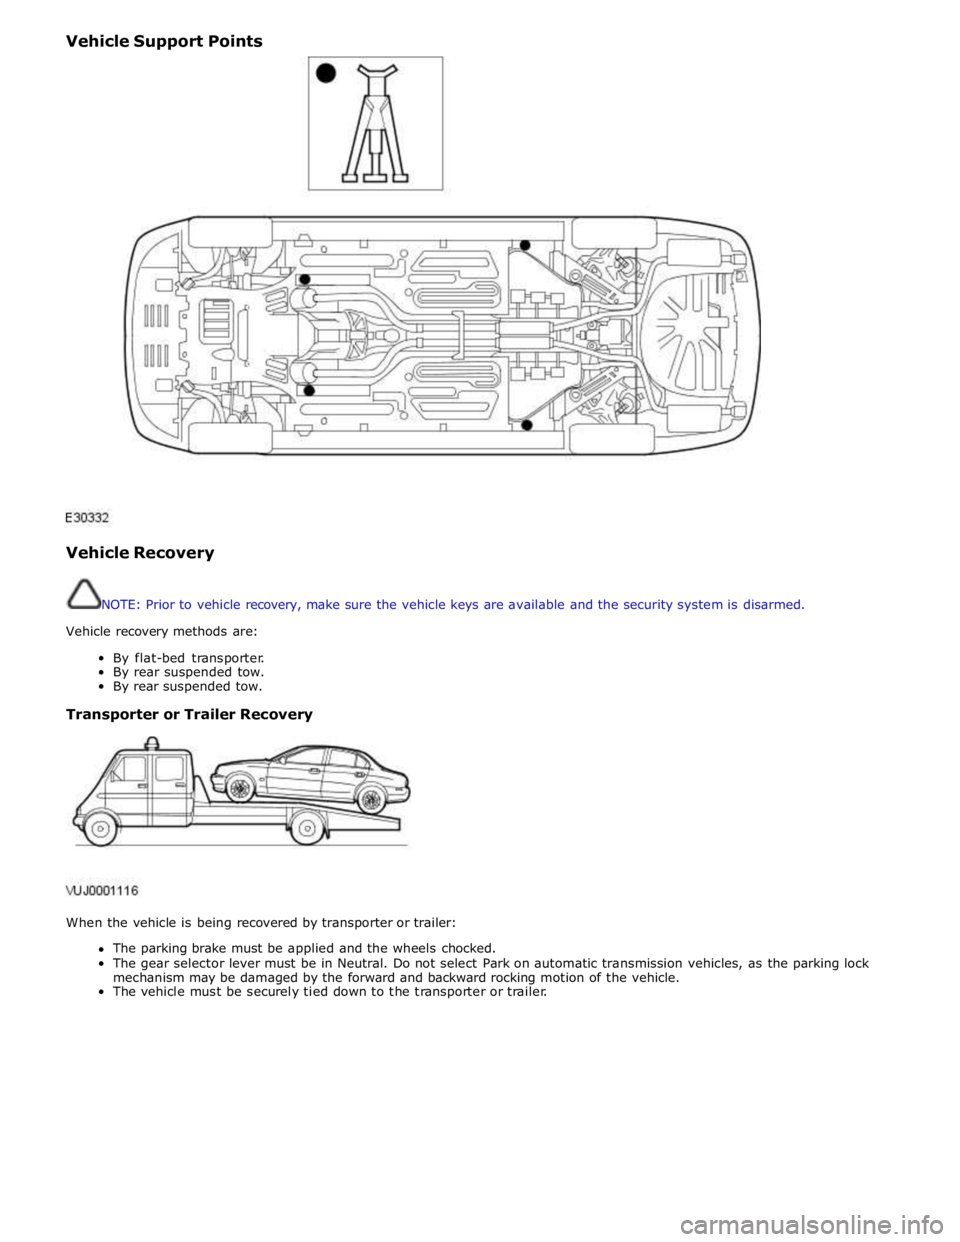 JAGUAR XFR 2010 1.G Service Manual Vehicle Support Points 
 
 
 
Vehicle Recovery 
 
 
NOTE: Prior to vehicle recovery, make sure the vehicle keys are available and the security system is disarmed. 
 
Vehicle recovery methods are: 
 
B